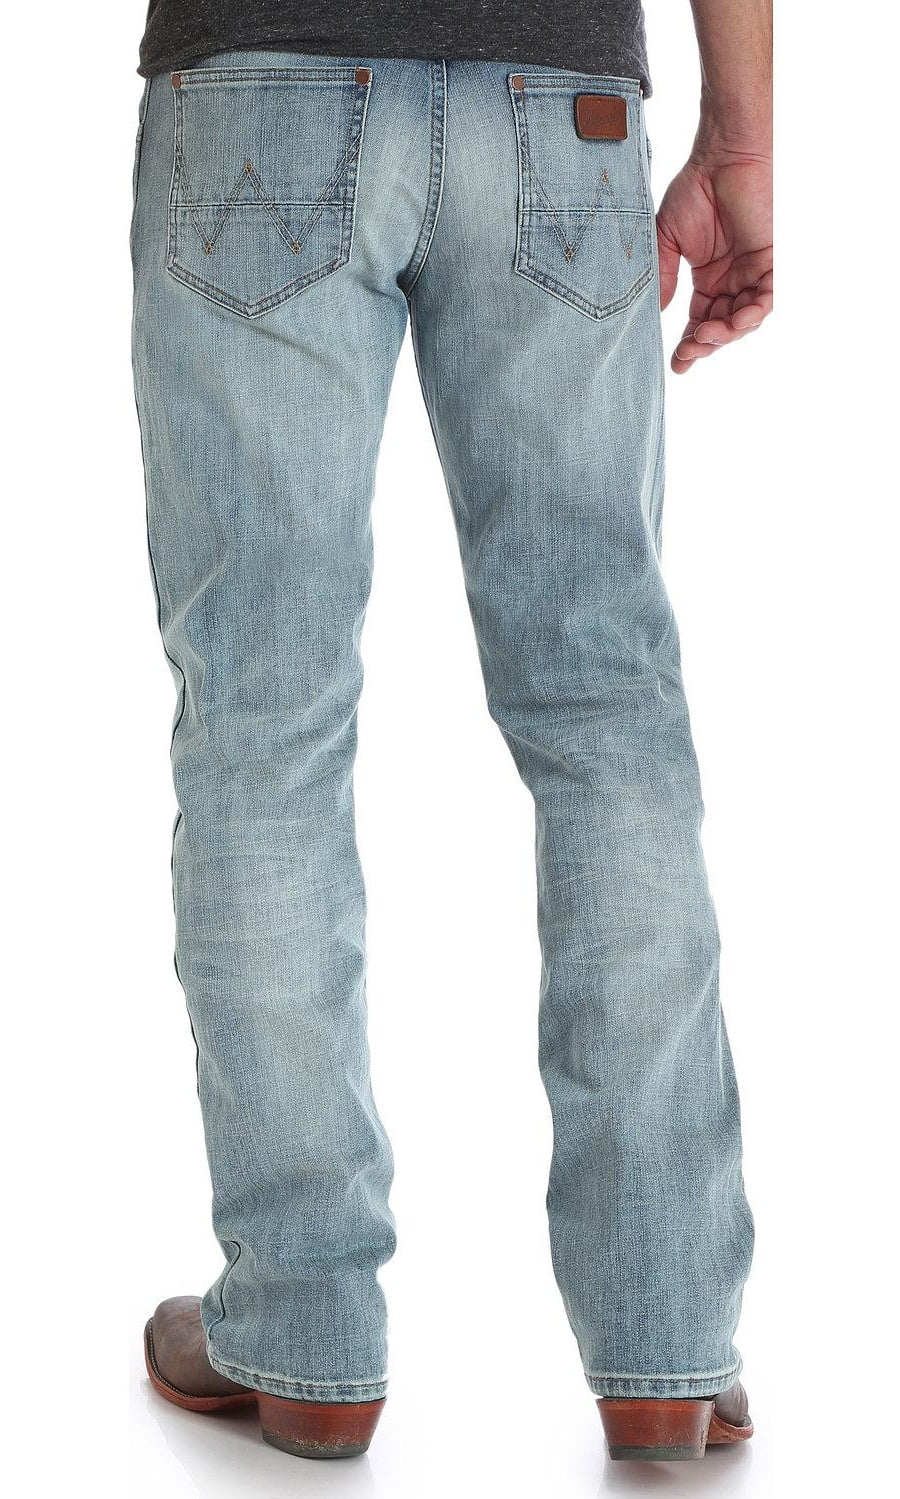 boots with slim fit jeans